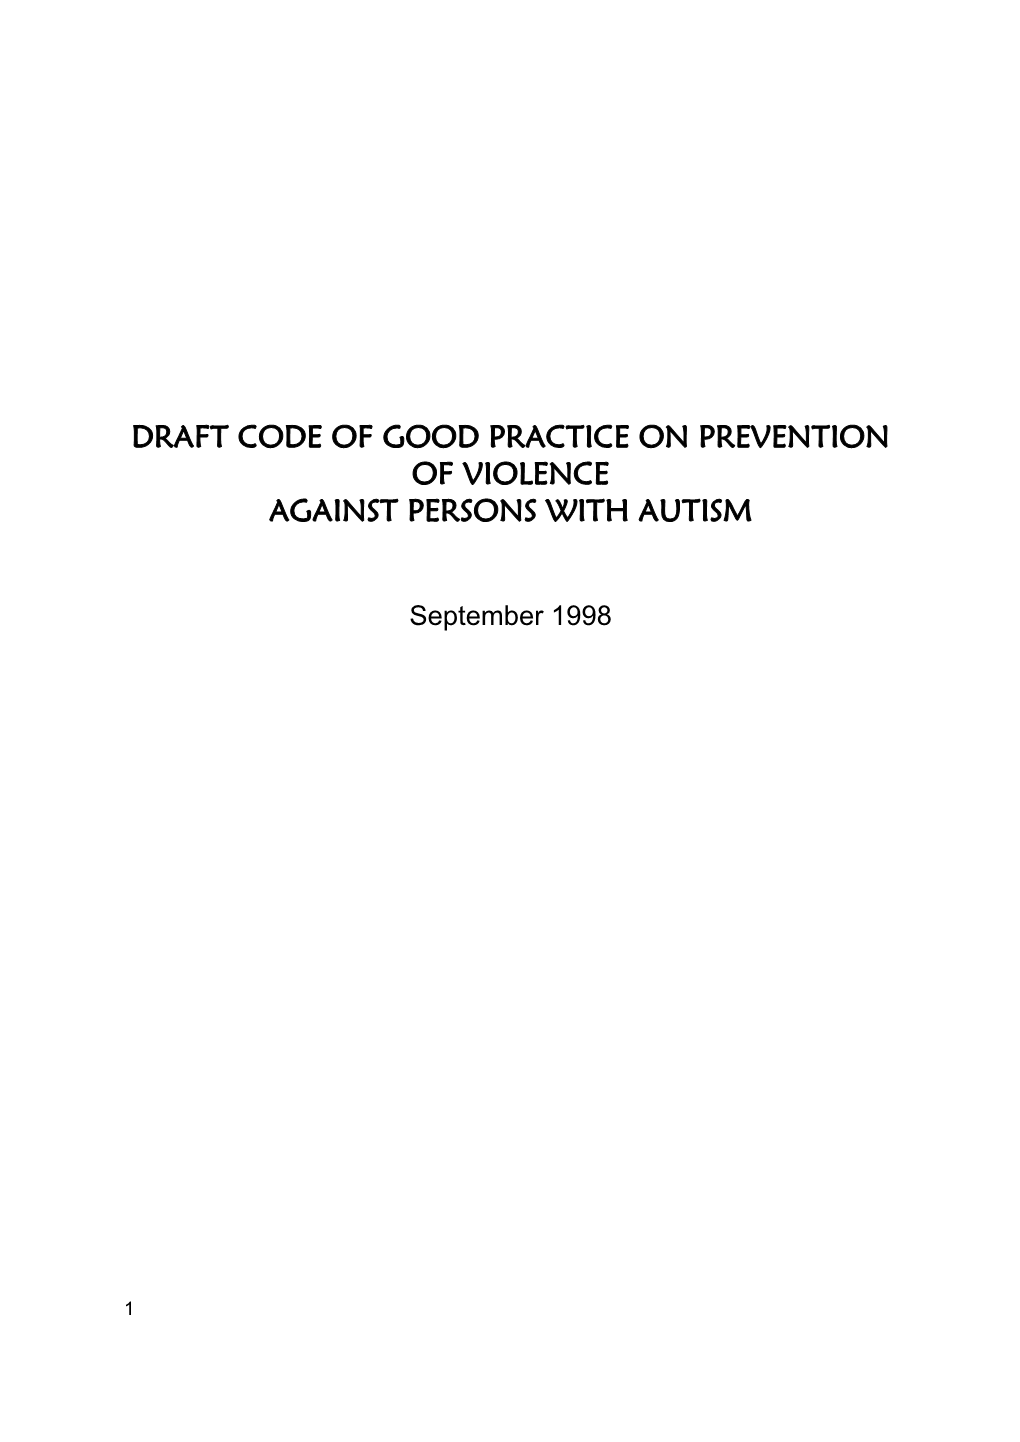 Draft Code of Good Practice on Prevention of Violence Against Persons with Autism